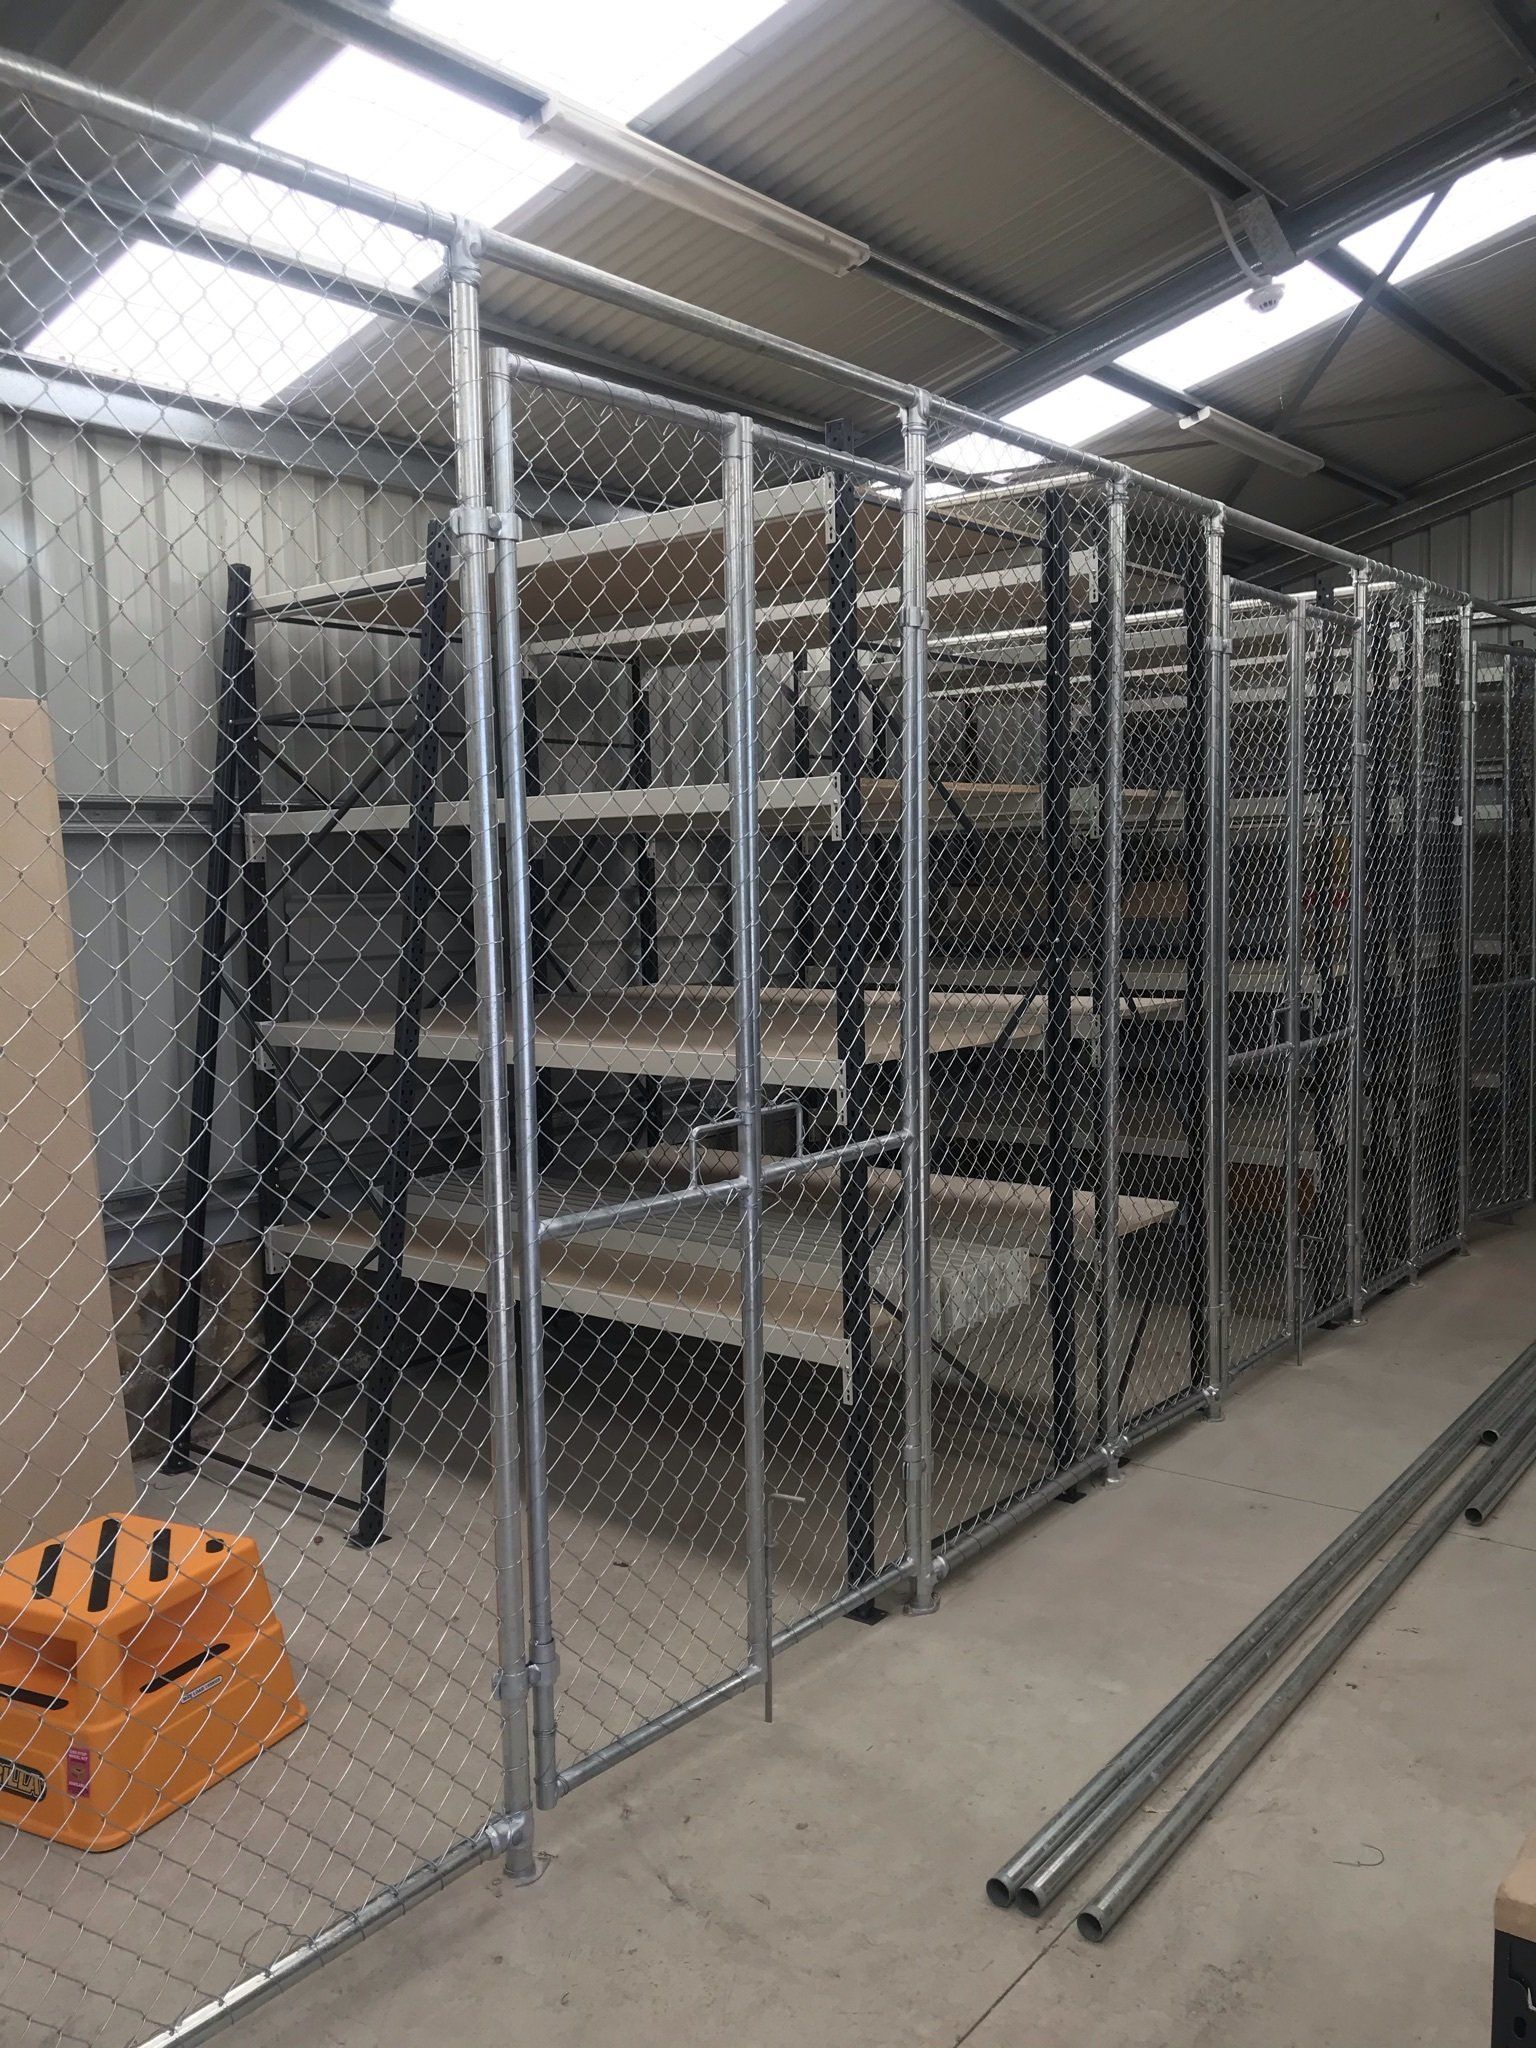 Chain mesh storage cages in a sports shed